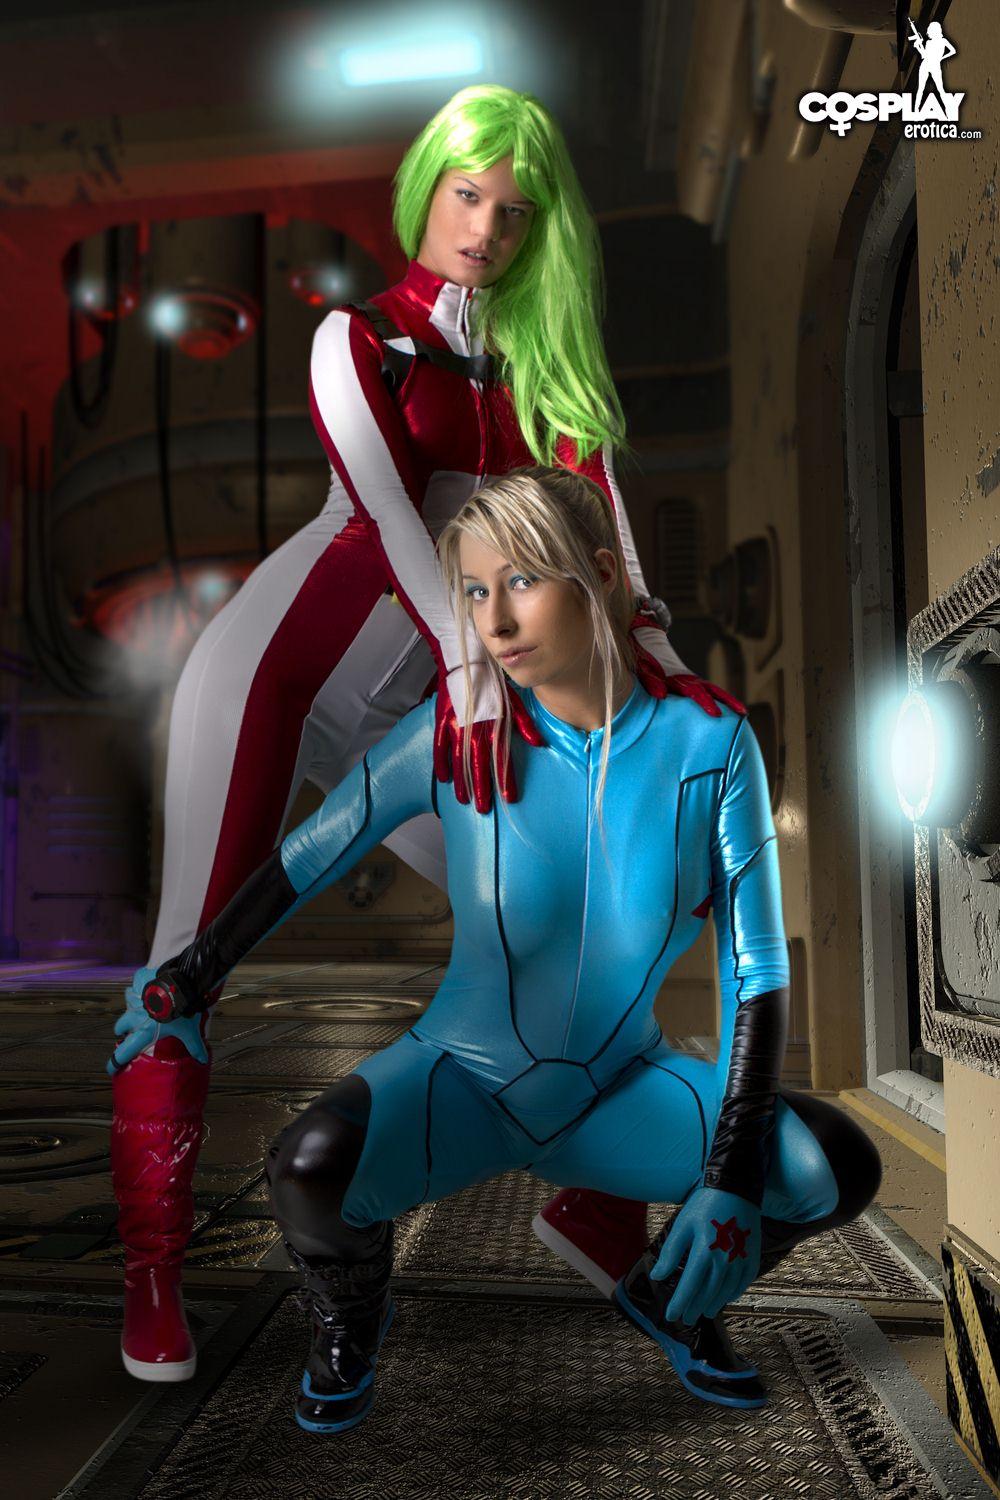 Cosplayers Sandy Bell and Ginger dress up as Metroid characters and get it on #54531172